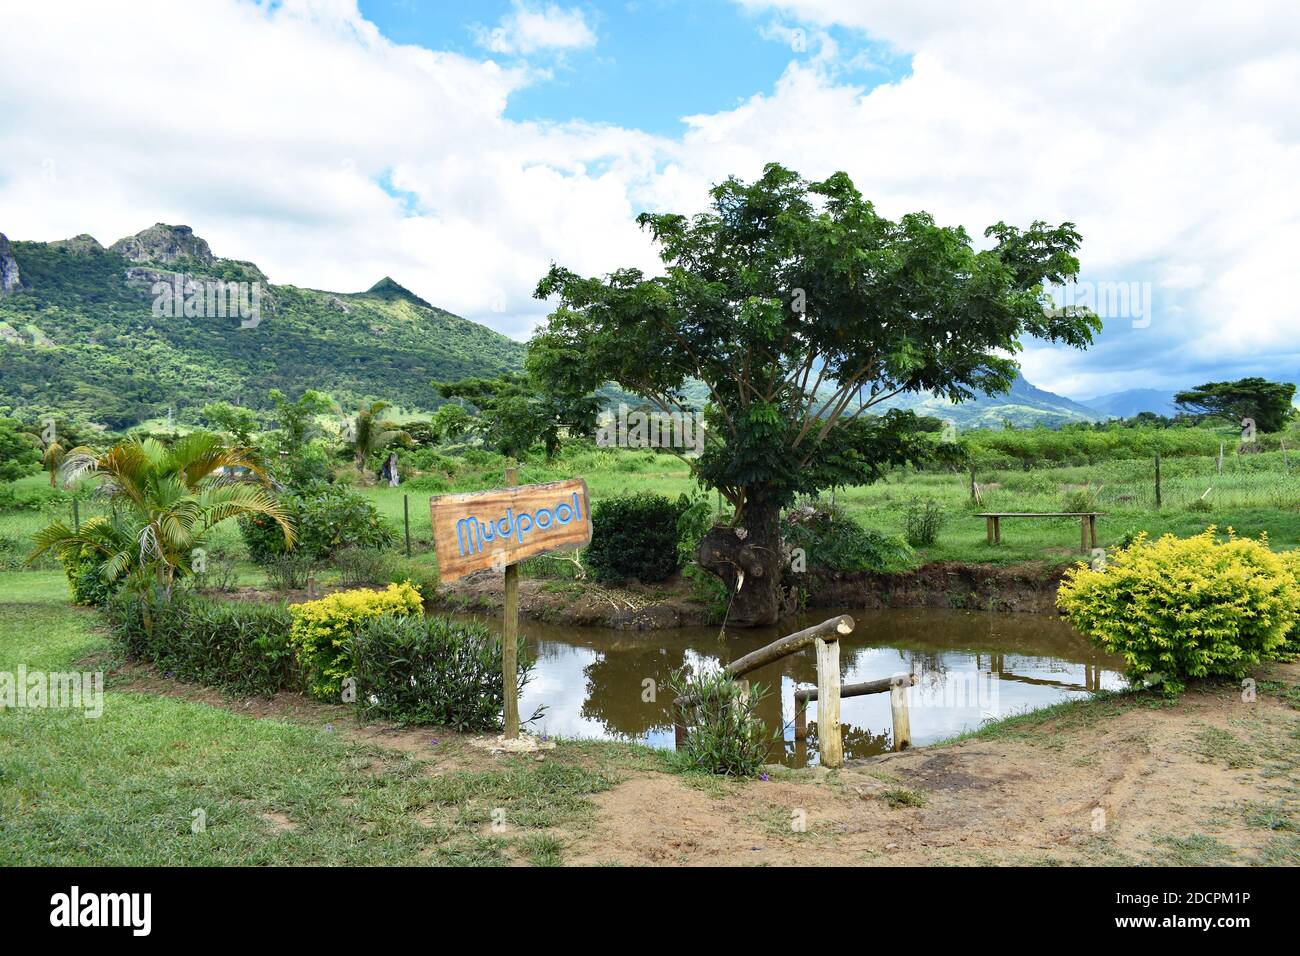 Tifajek Mud Pool & Hotspring backed by the Mountains of the Sleeping Giant in Nadi, Fiji.  A signpost reads Mudpool and railings lead into the water. Stock Photo